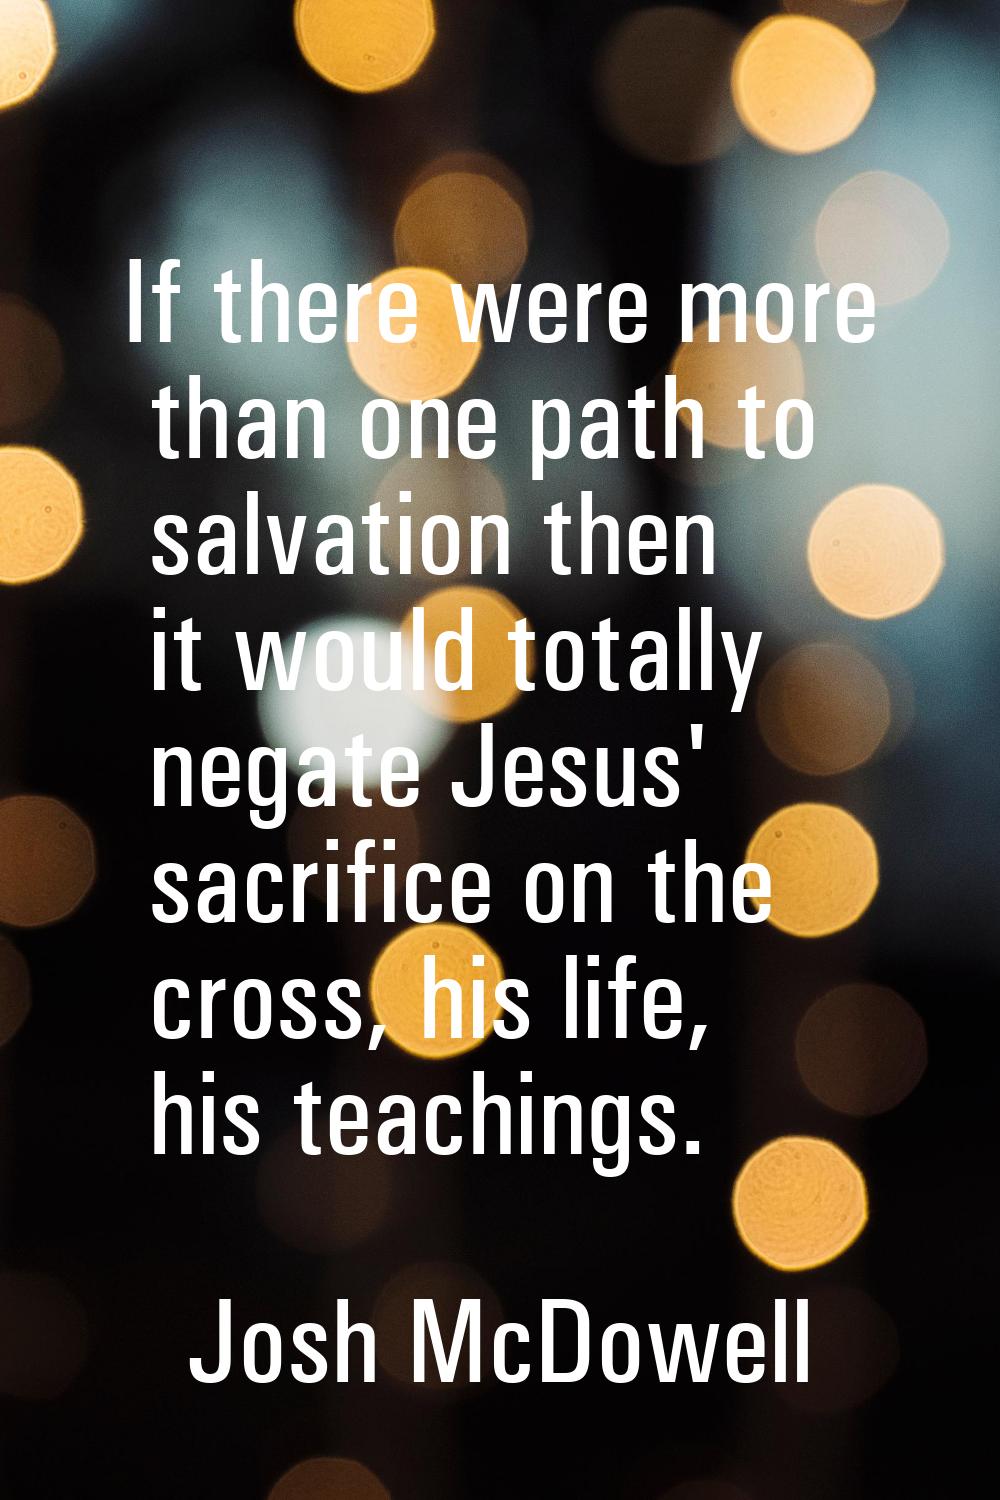 If there were more than one path to salvation then it would totally negate Jesus' sacrifice on the 